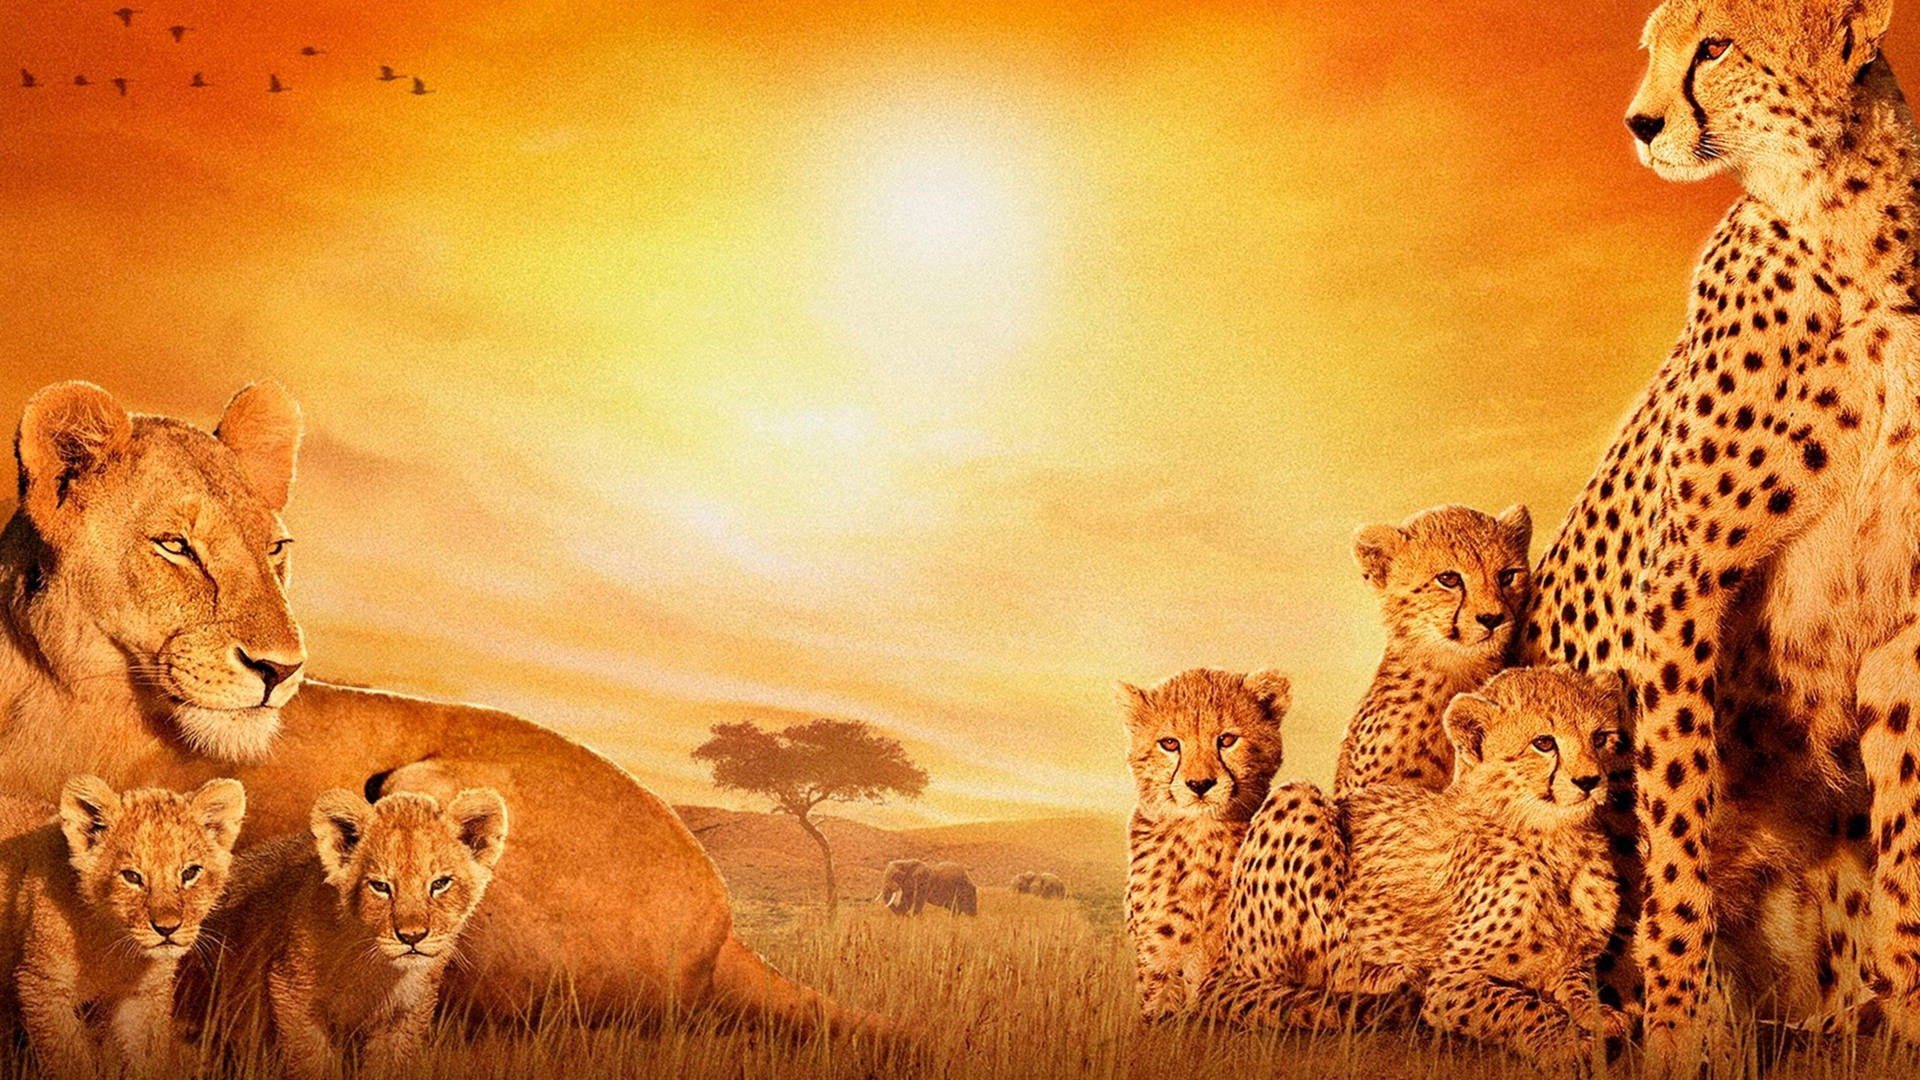 Lions And Cheetahs In Africa Picture